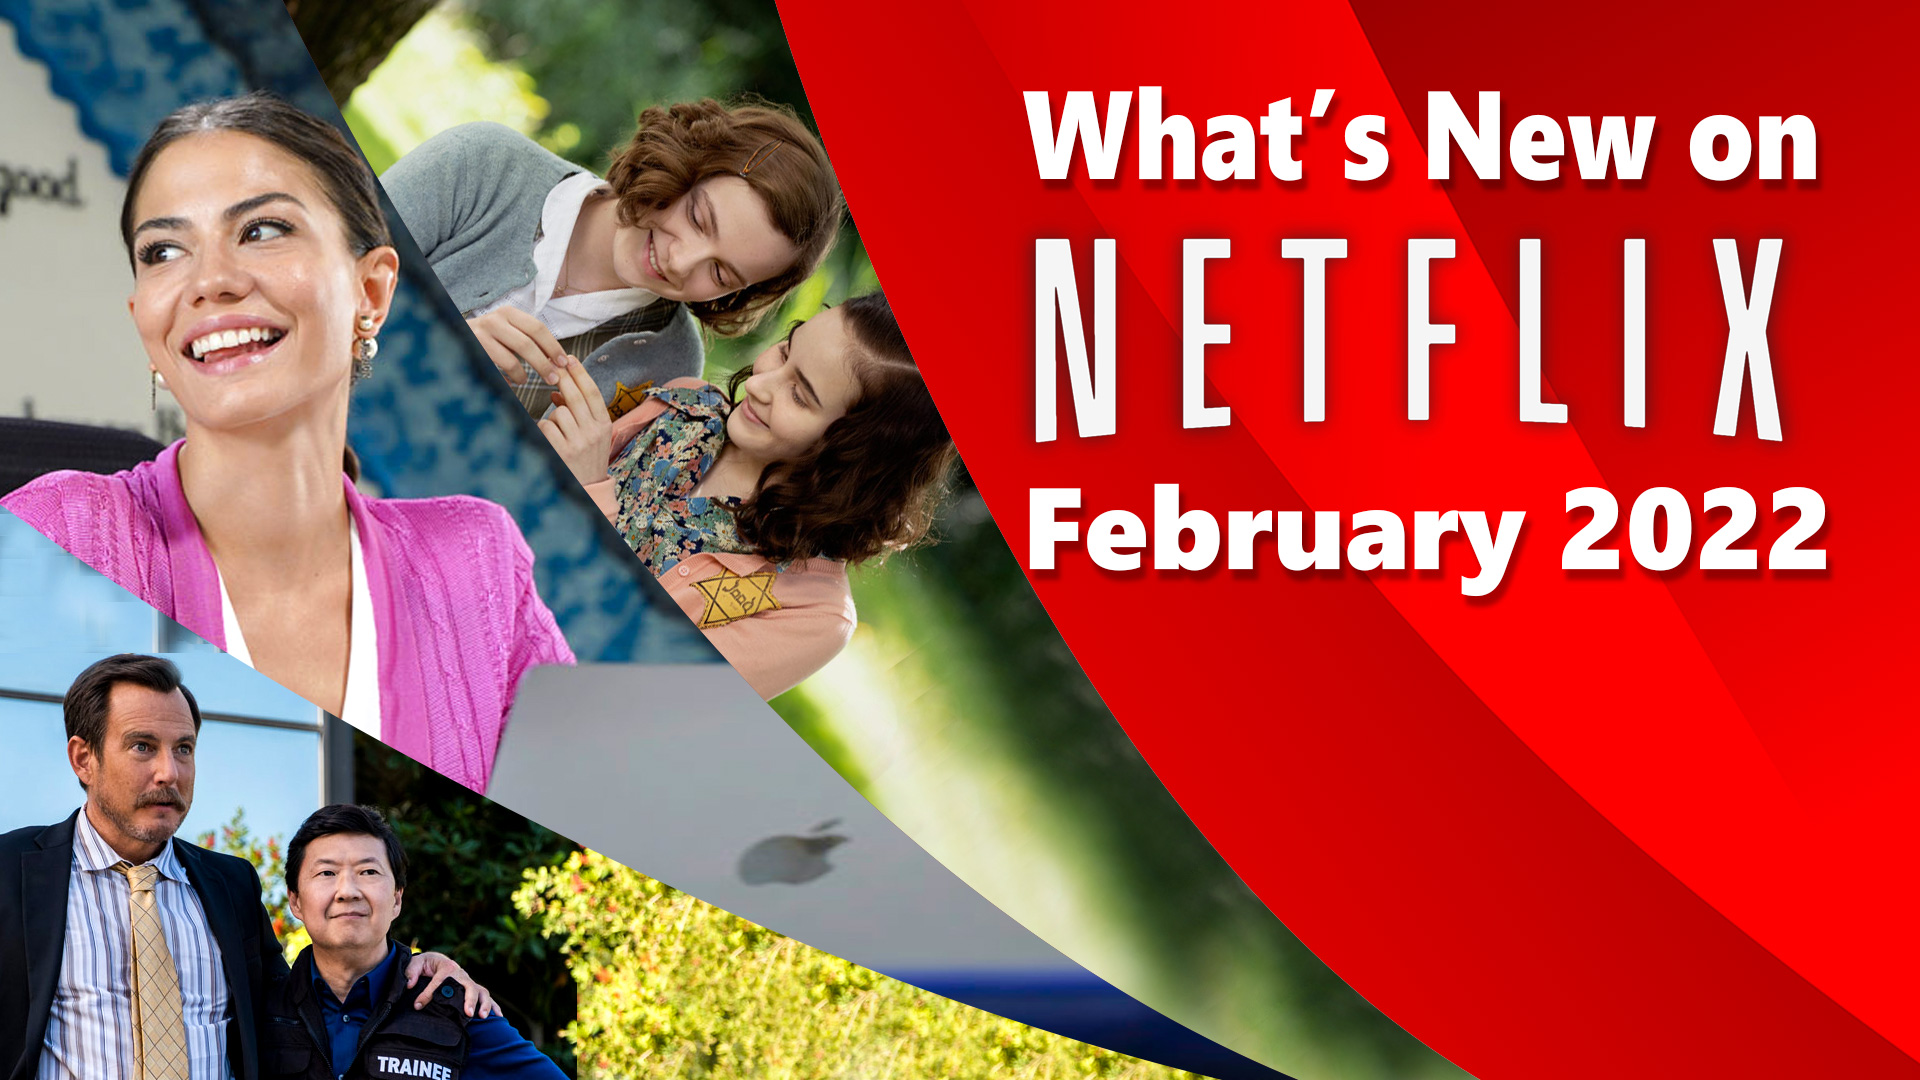 What's New on Netflix February 2022